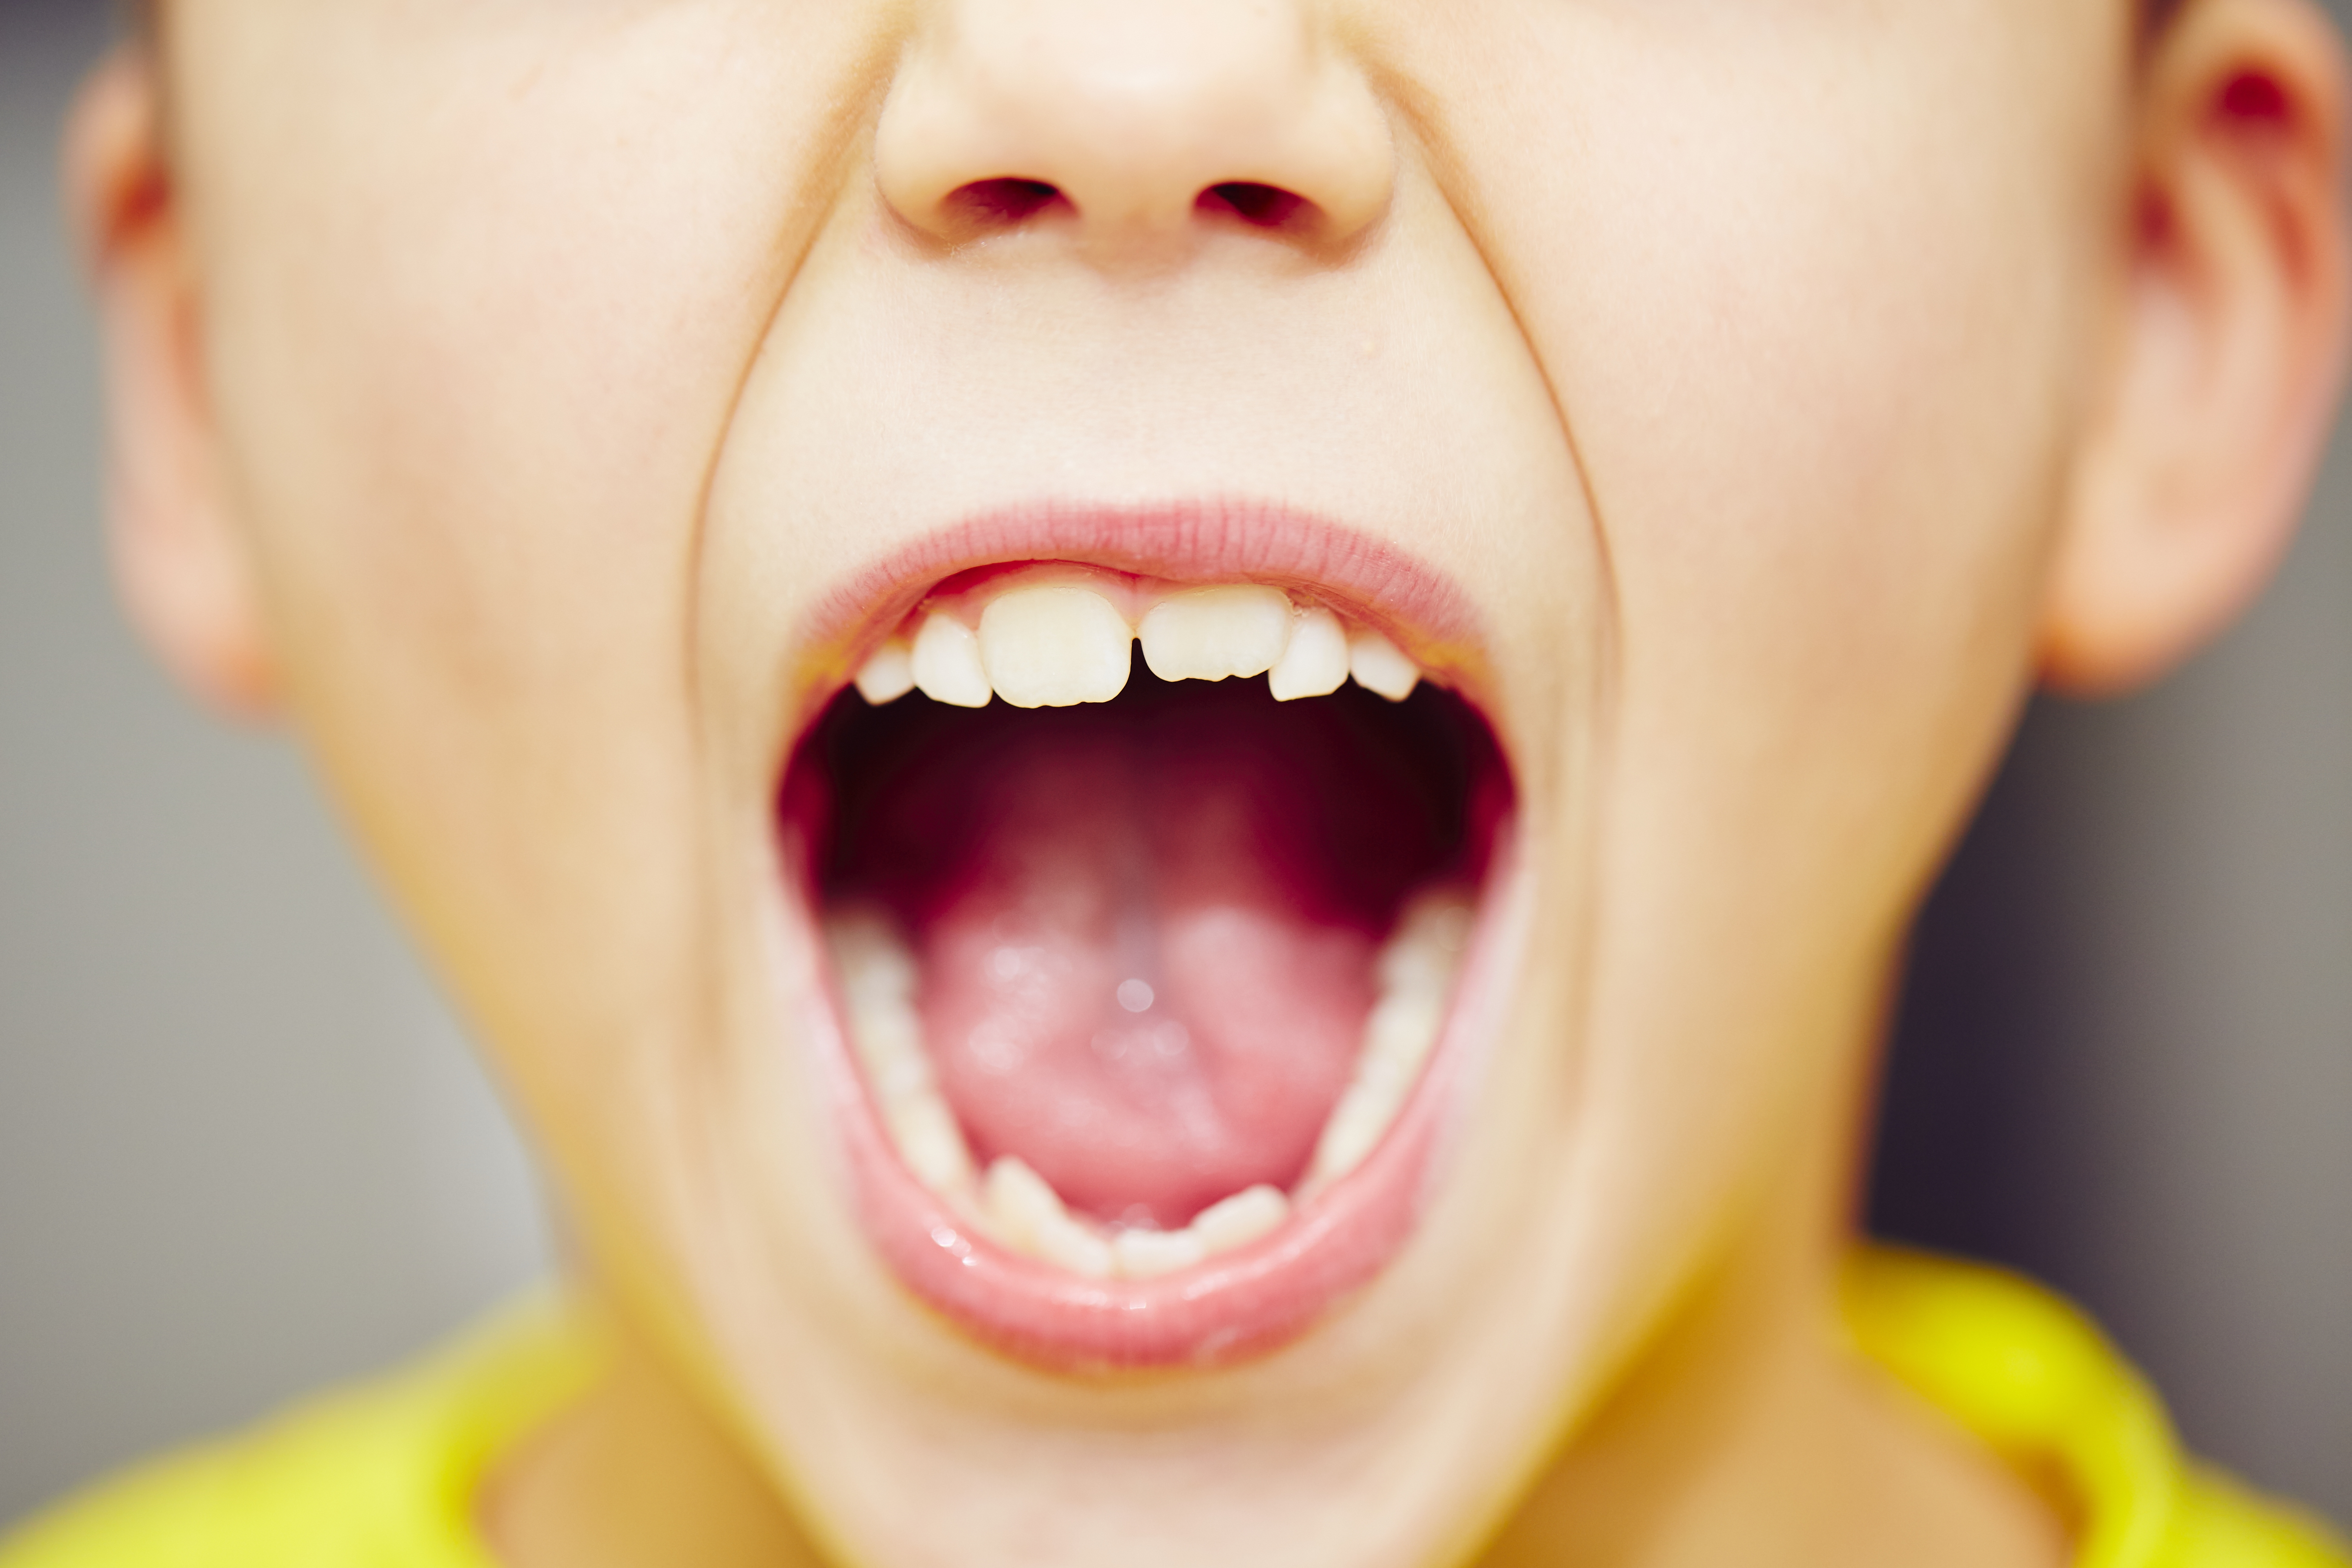 child open mouth image